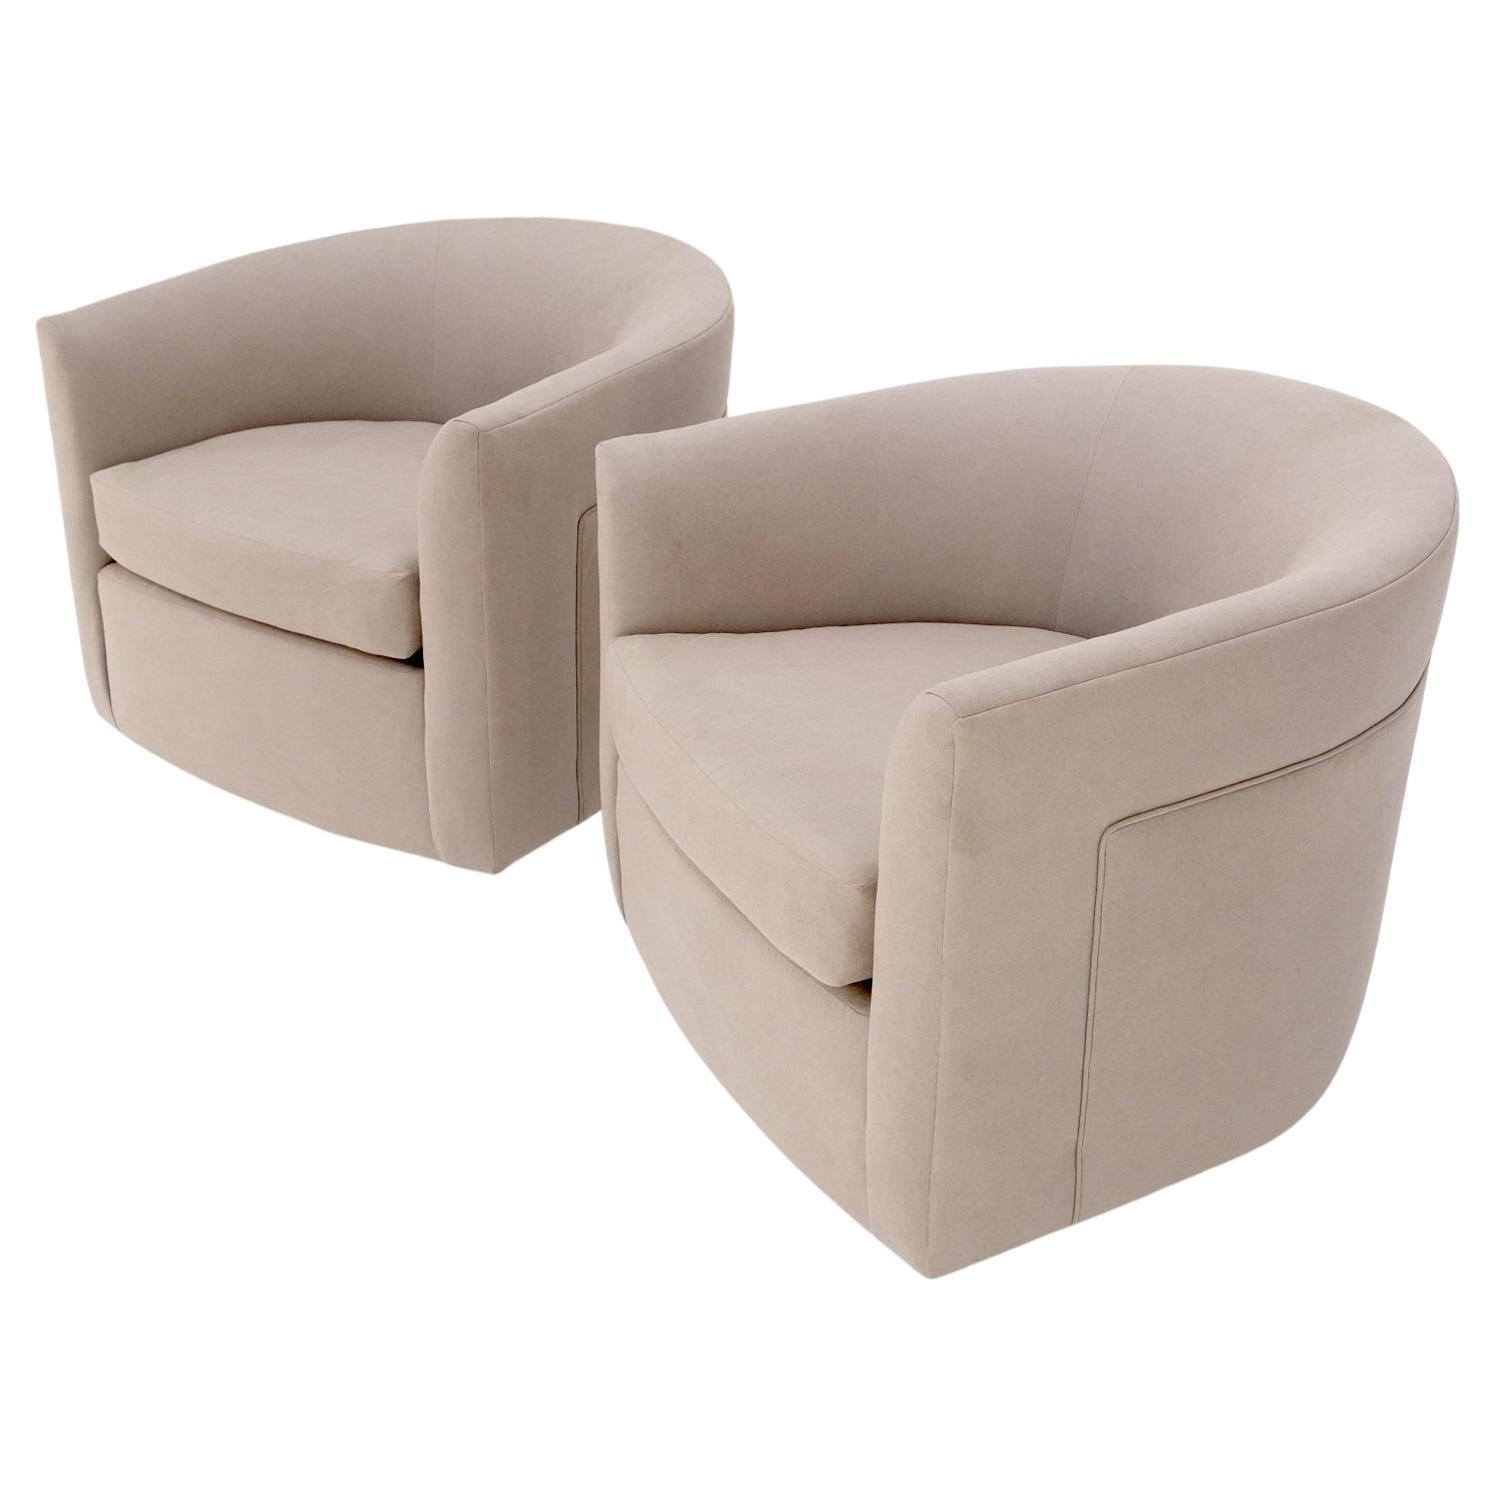 Pair of New Alcantera Upholstery Barrel Back Tub Baughman Lounge Chairs SHARP! In Excellent Condition For Sale In Rockaway, NJ